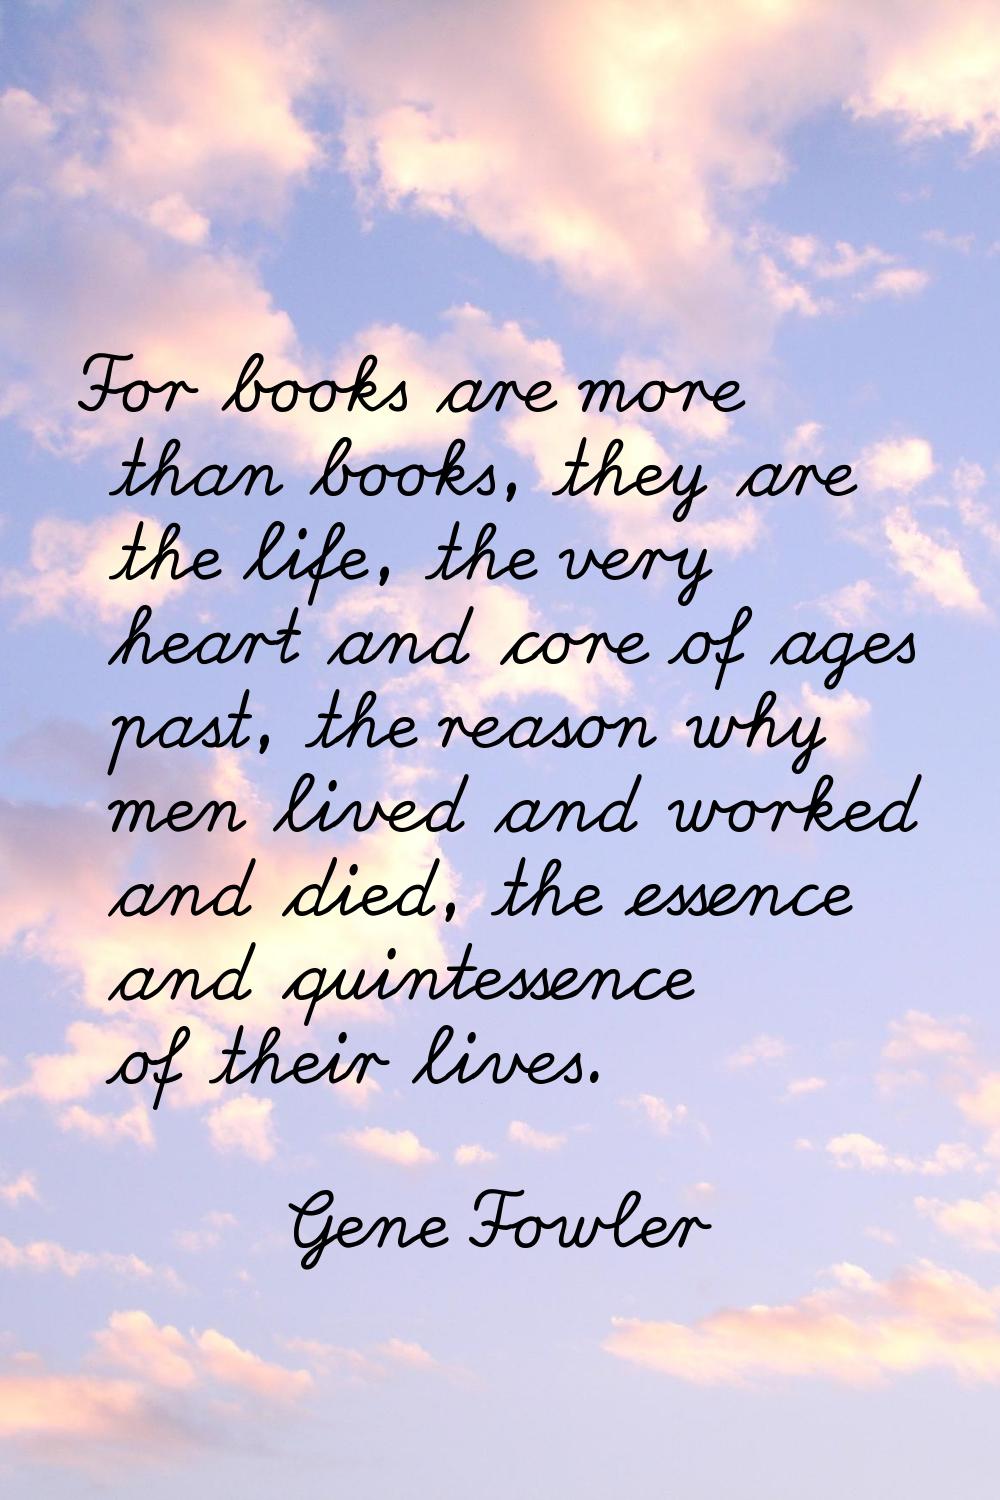 For books are more than books, they are the life, the very heart and core of ages past, the reason 